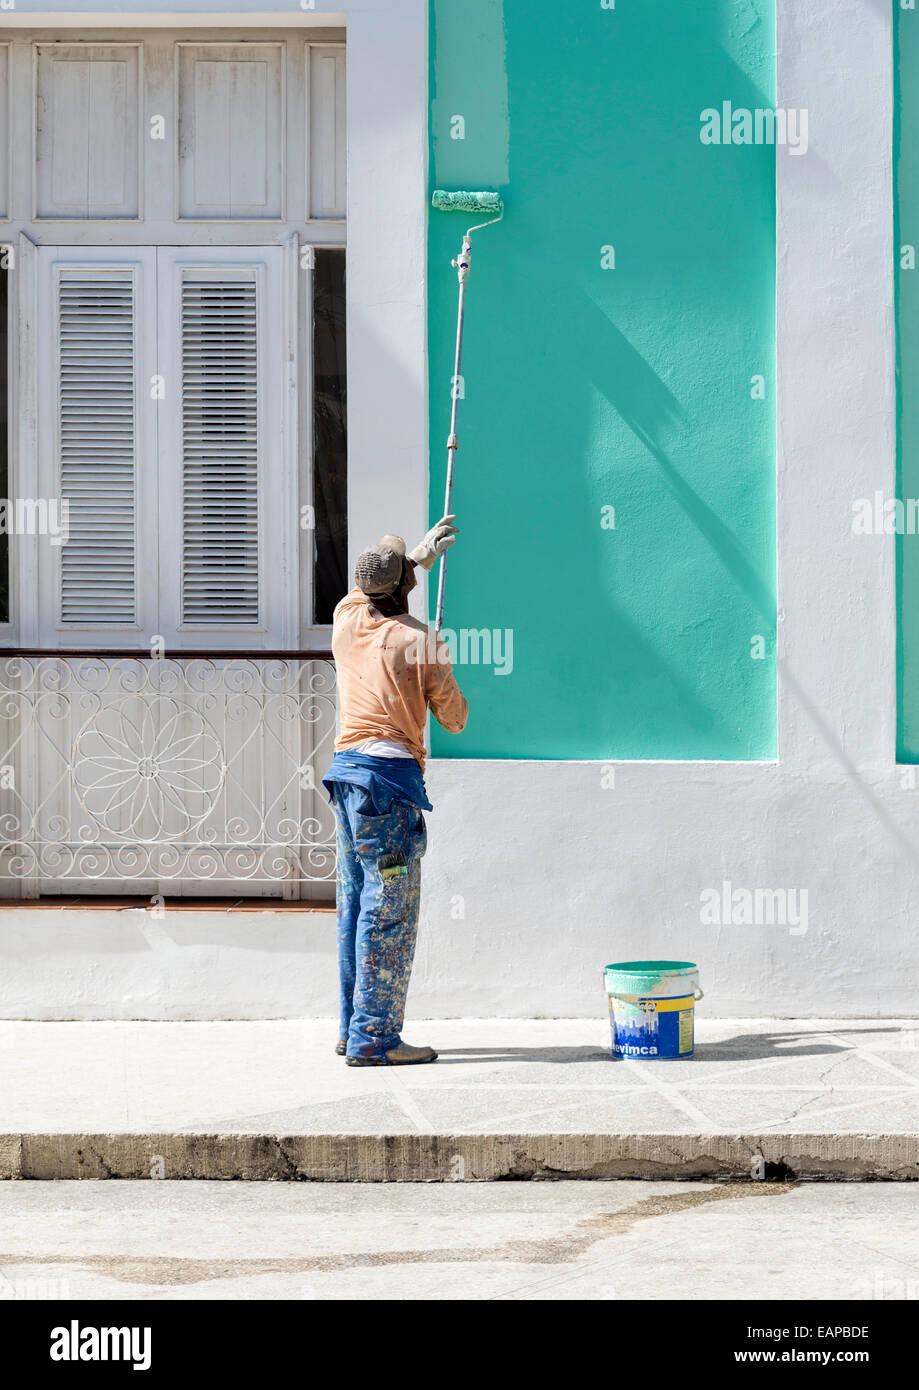 CIENFUEGOS, CUBA - MAY 7, 2014: A man paints the facade of a house in the city center Stock Photo